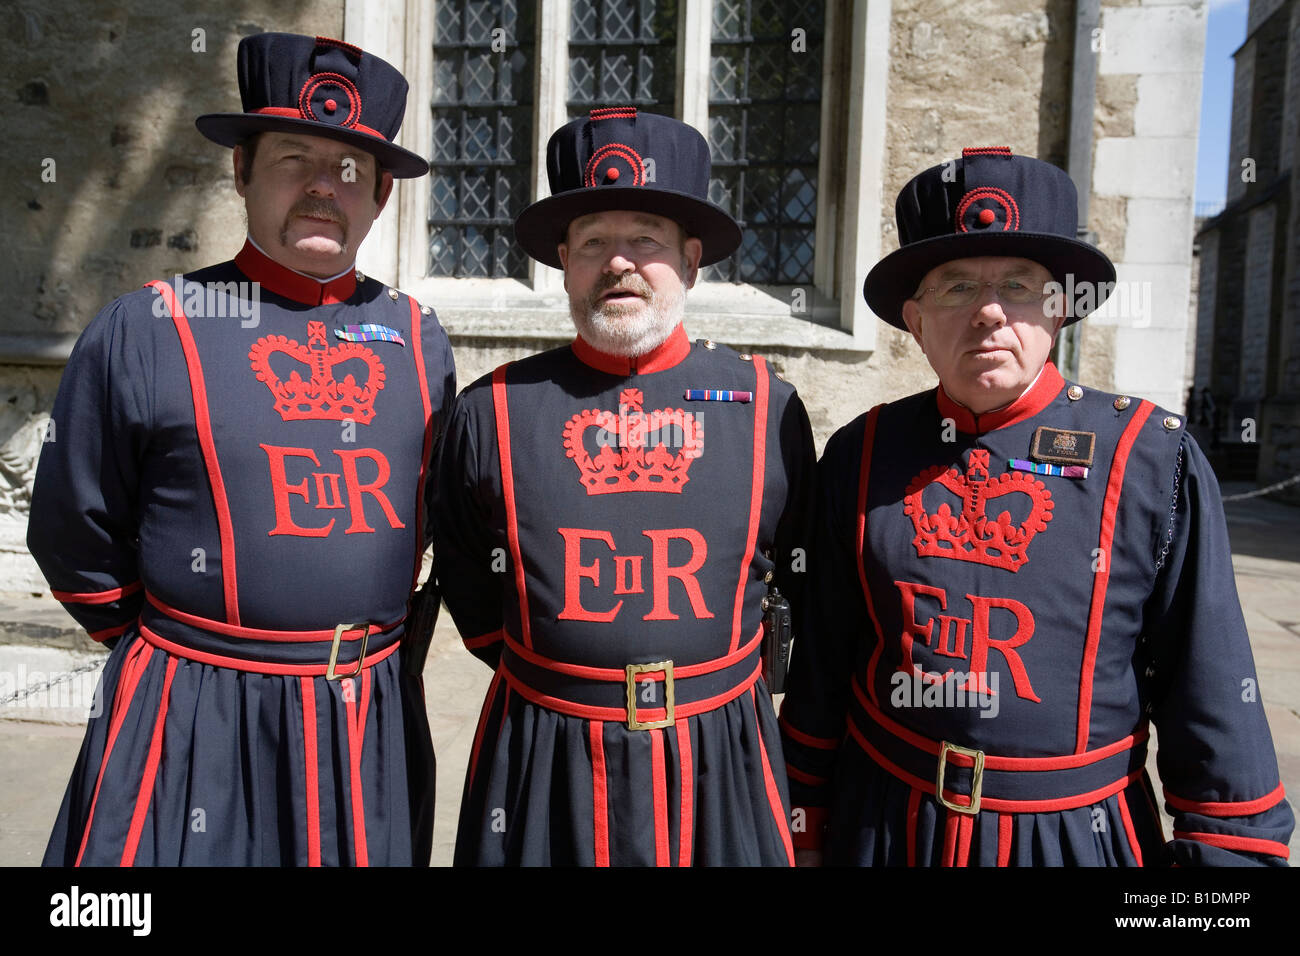 Beefeaters Yeomen of the 'Guards warder' at the 'Tower of London' England Britain UK Stock Photo